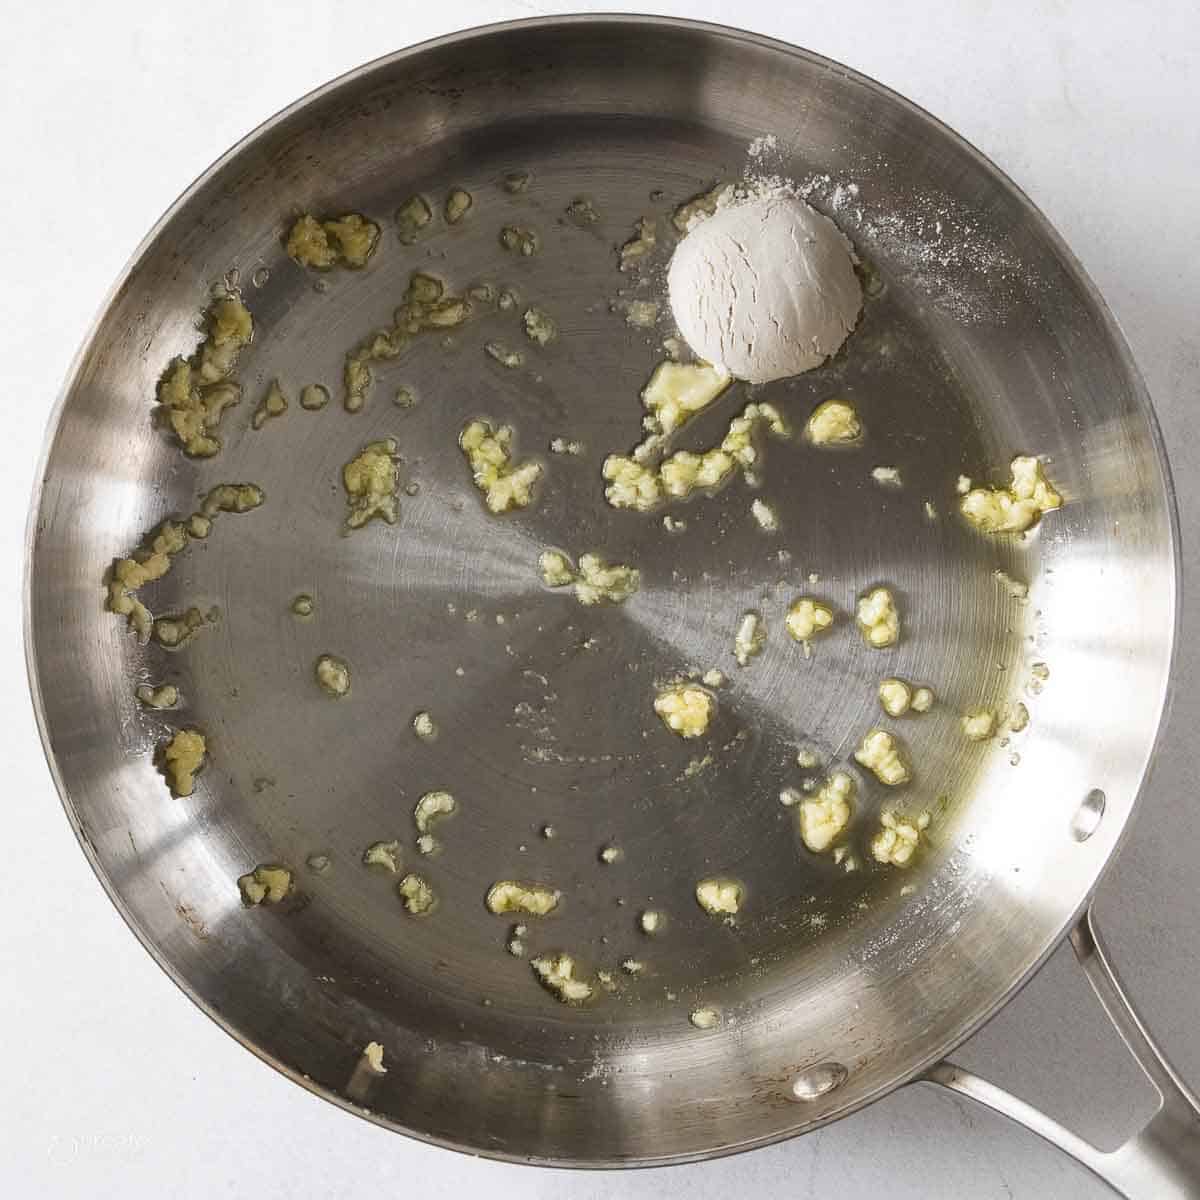 scoop of flour added to pan with minced garlic